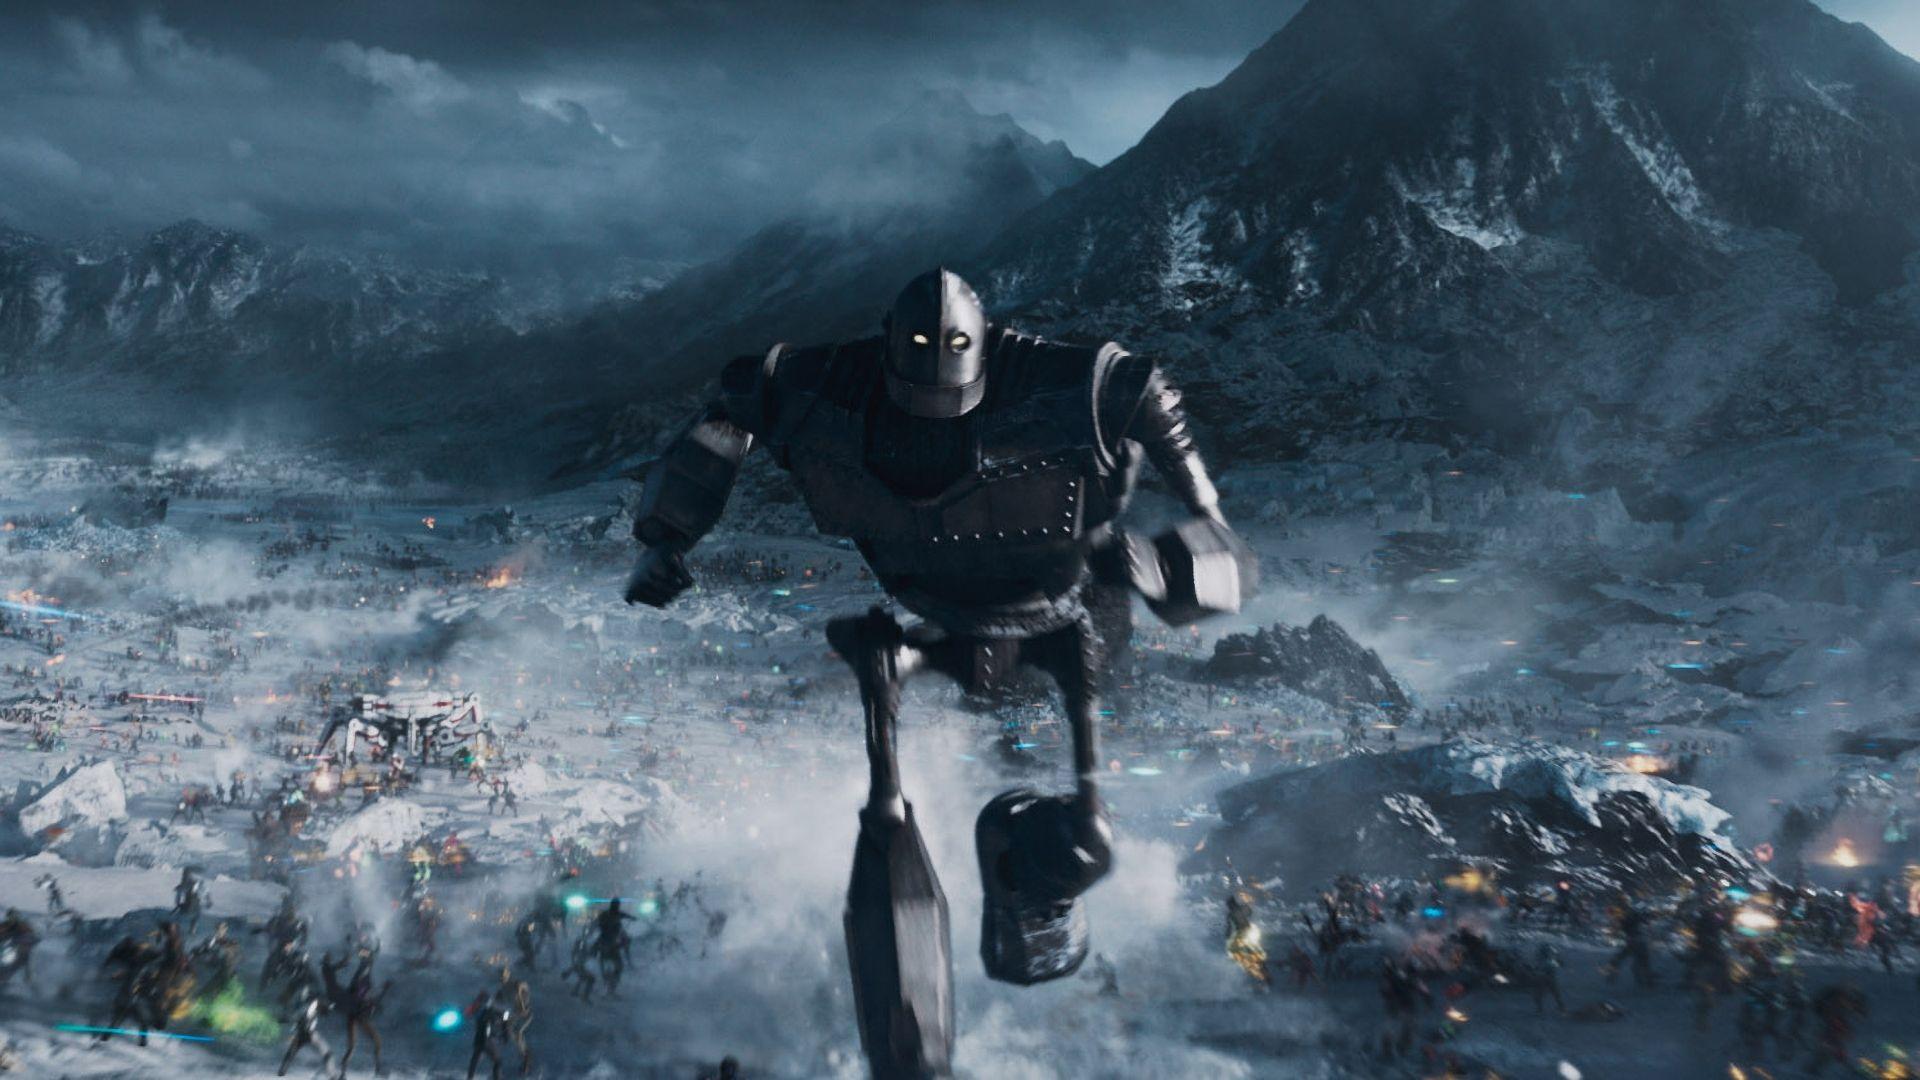 Wallpaper  The Iron Giant 1600x900  filur  1354323  HD Wallpapers   WallHere